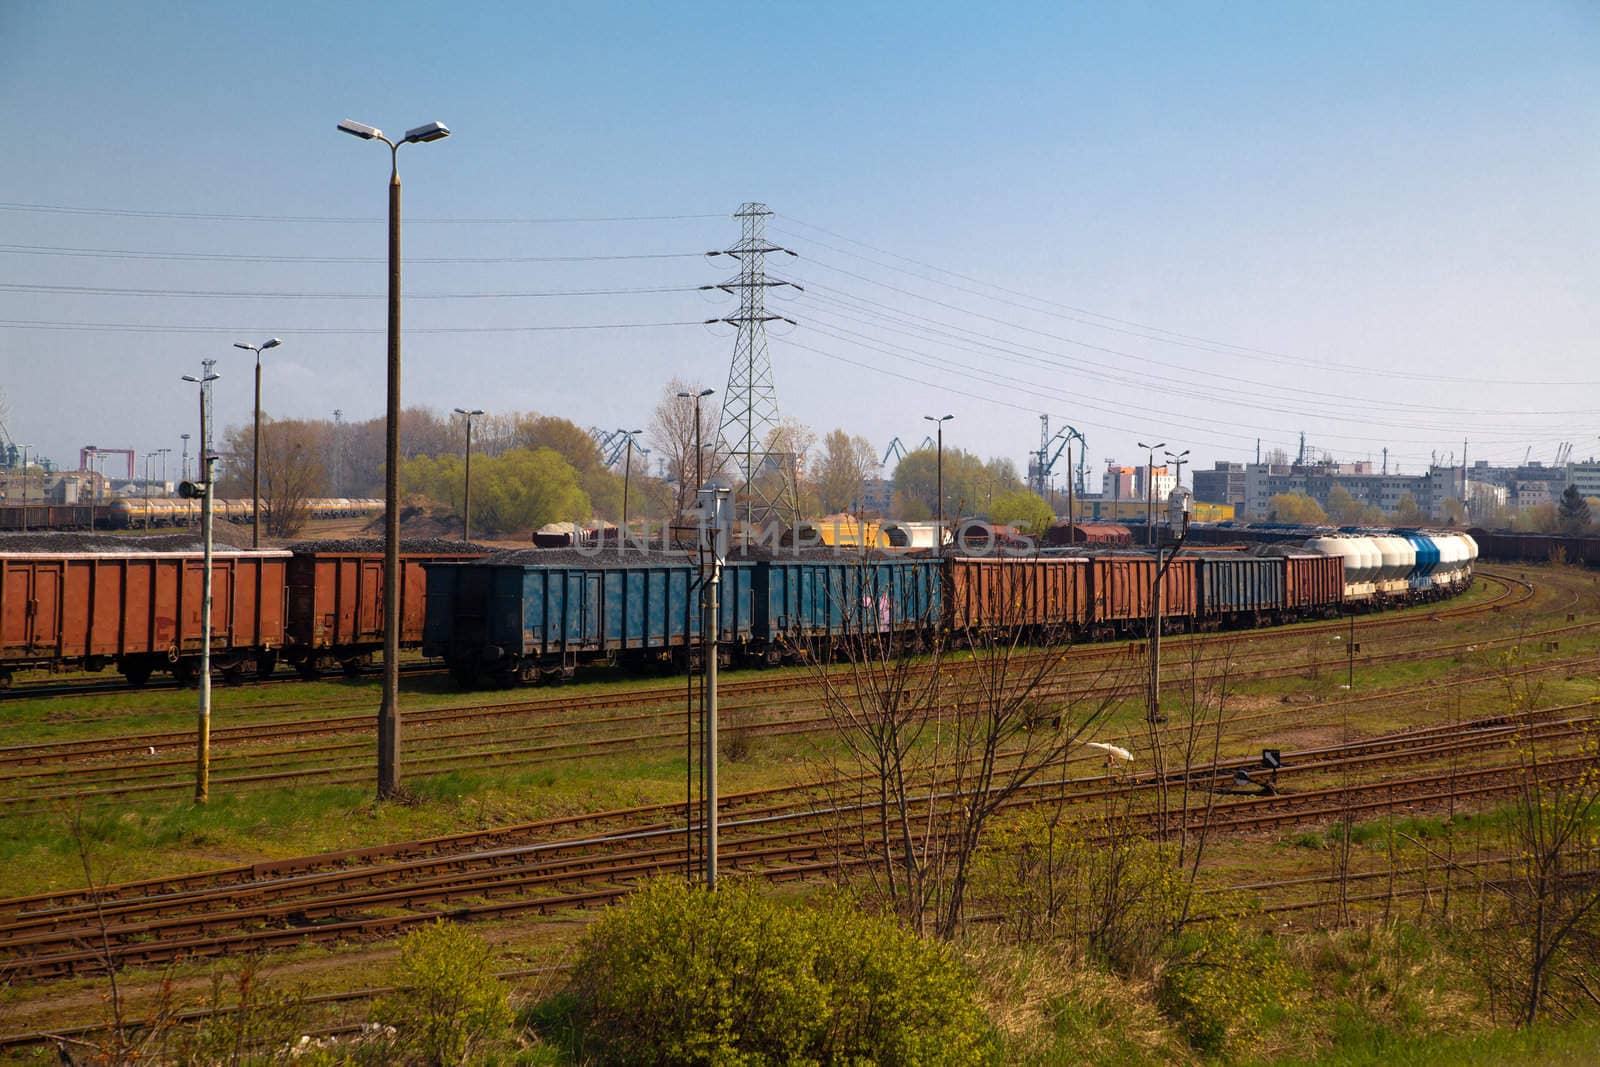 Overview of the railway freight station with lot of different wagons
